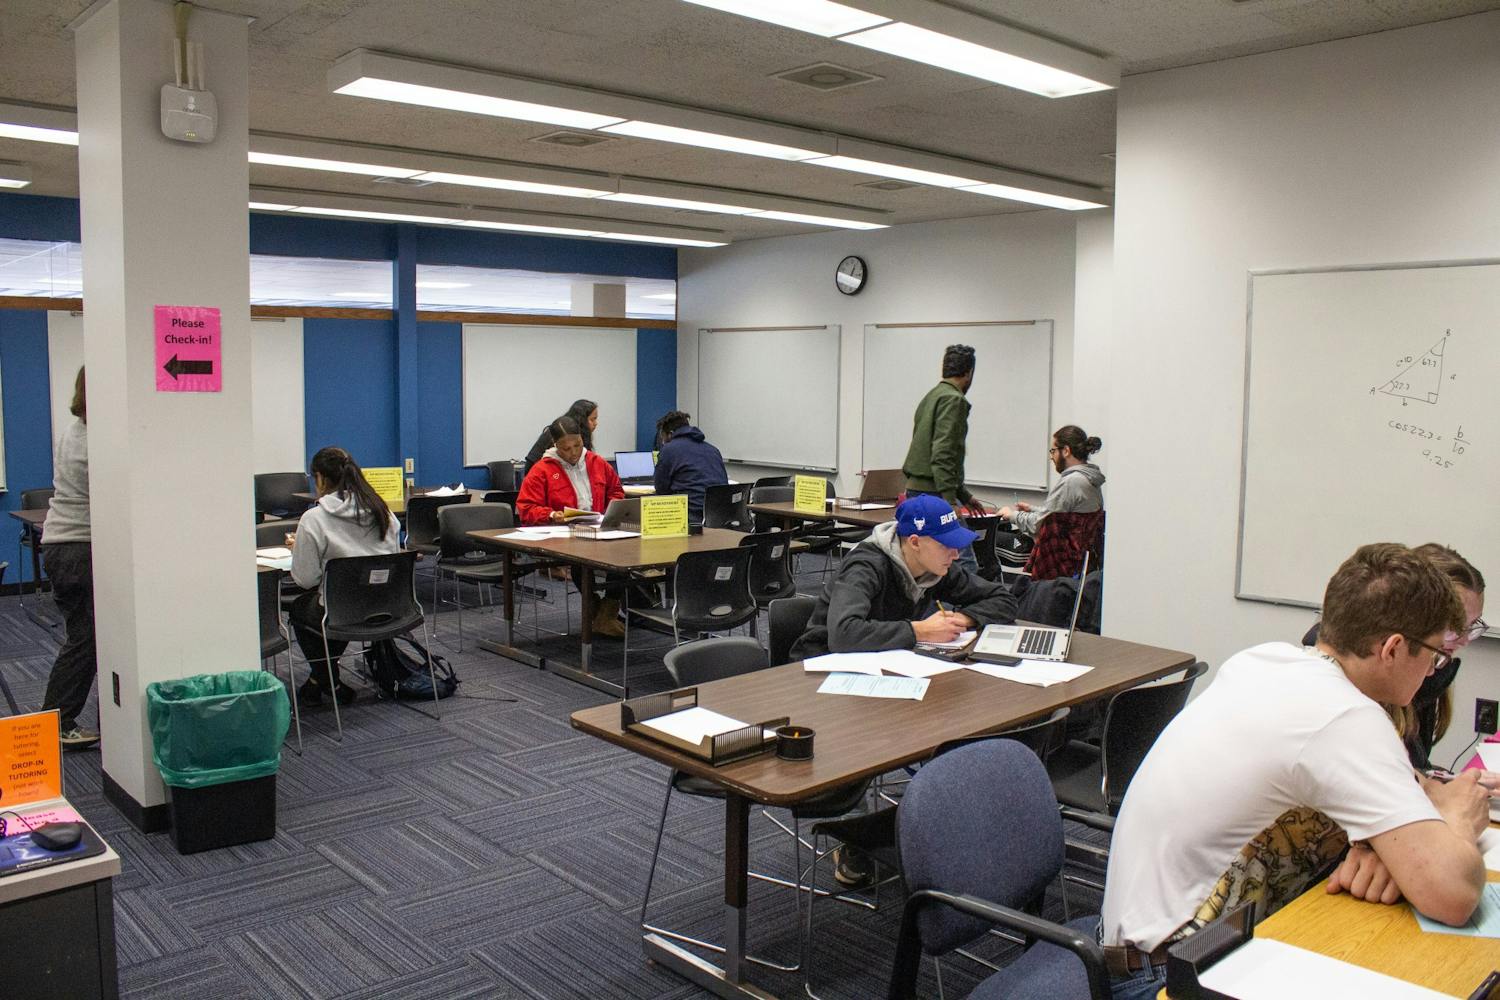 UB students receive math tutoring for free in the Math Place located in 211 Baldy Hall on Tuesday.